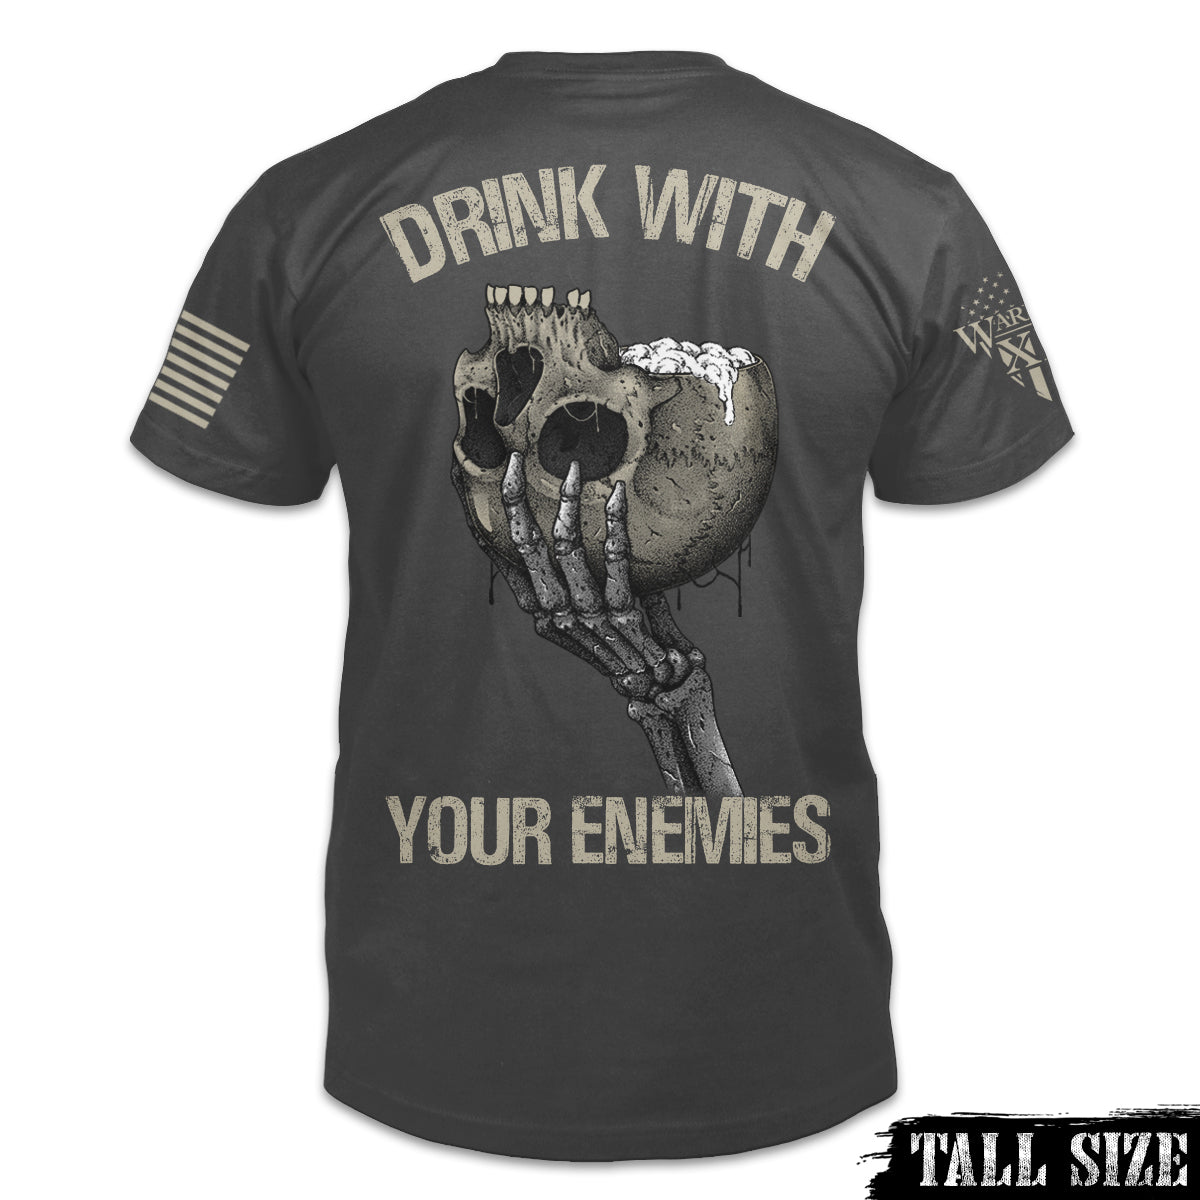 An asphalt grey t-shirt featuring a an upside-down skull with a foamy beverage coming out of the skull on the front pocket area.